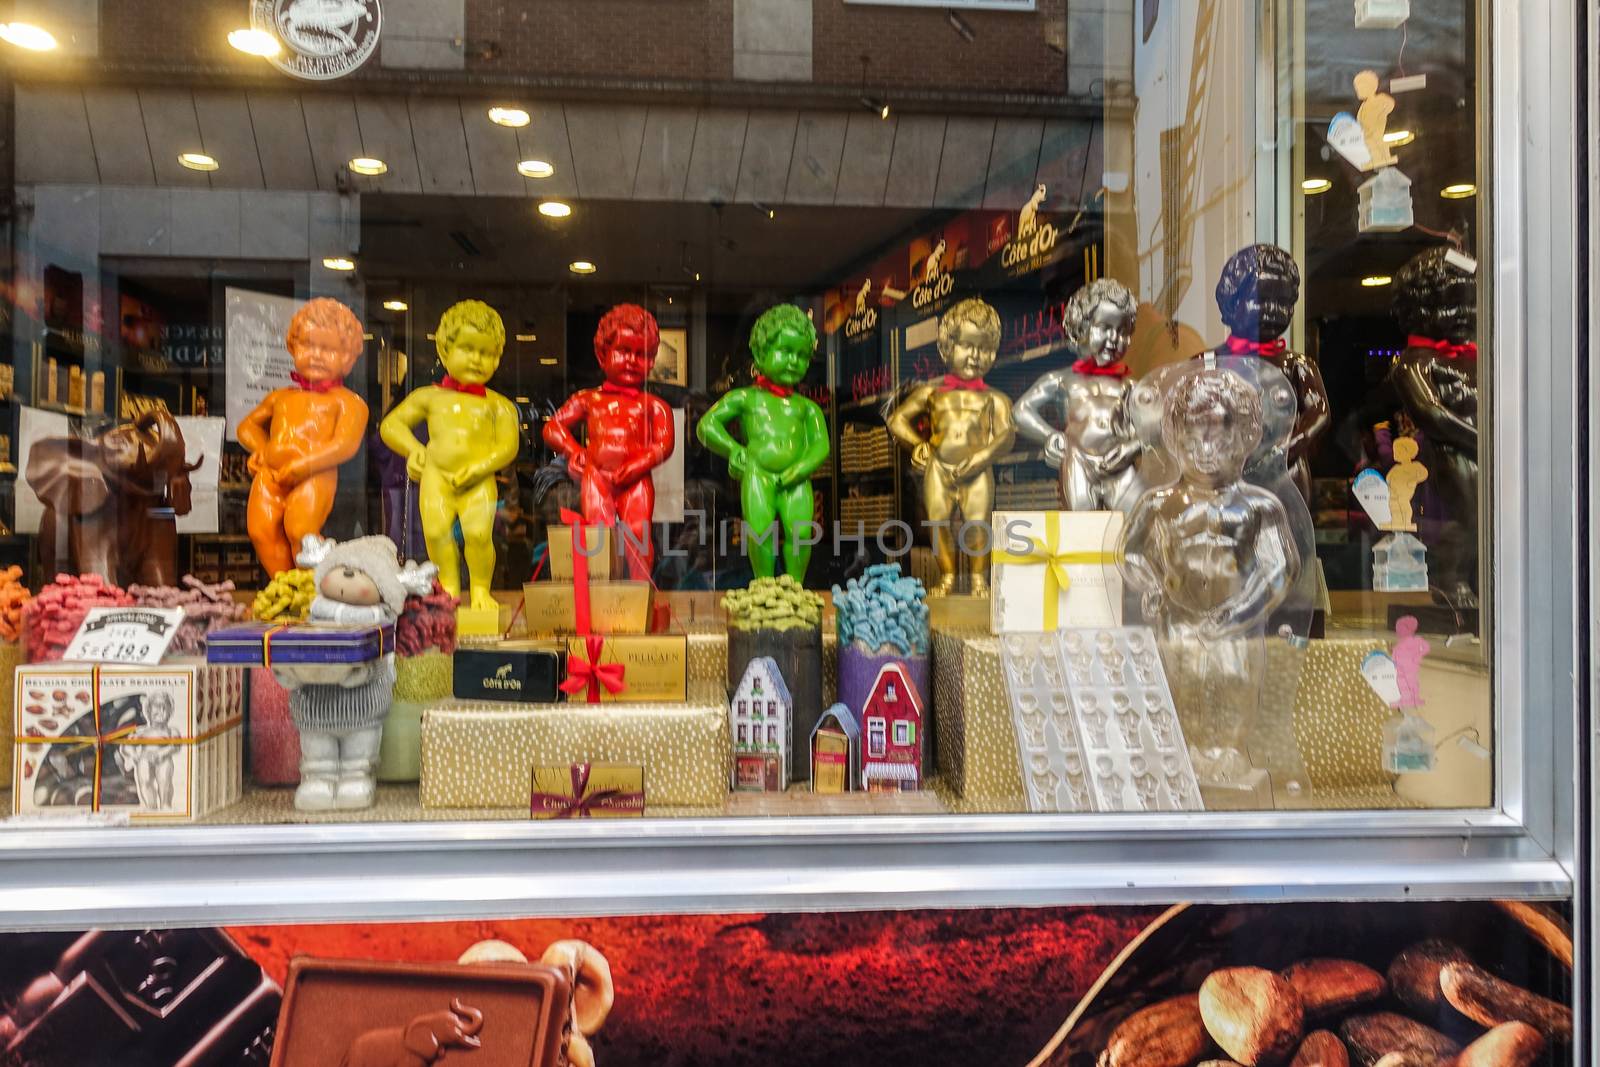 Chocolate Manneken Pis statues in different colors, Brussels Bel by Claudine